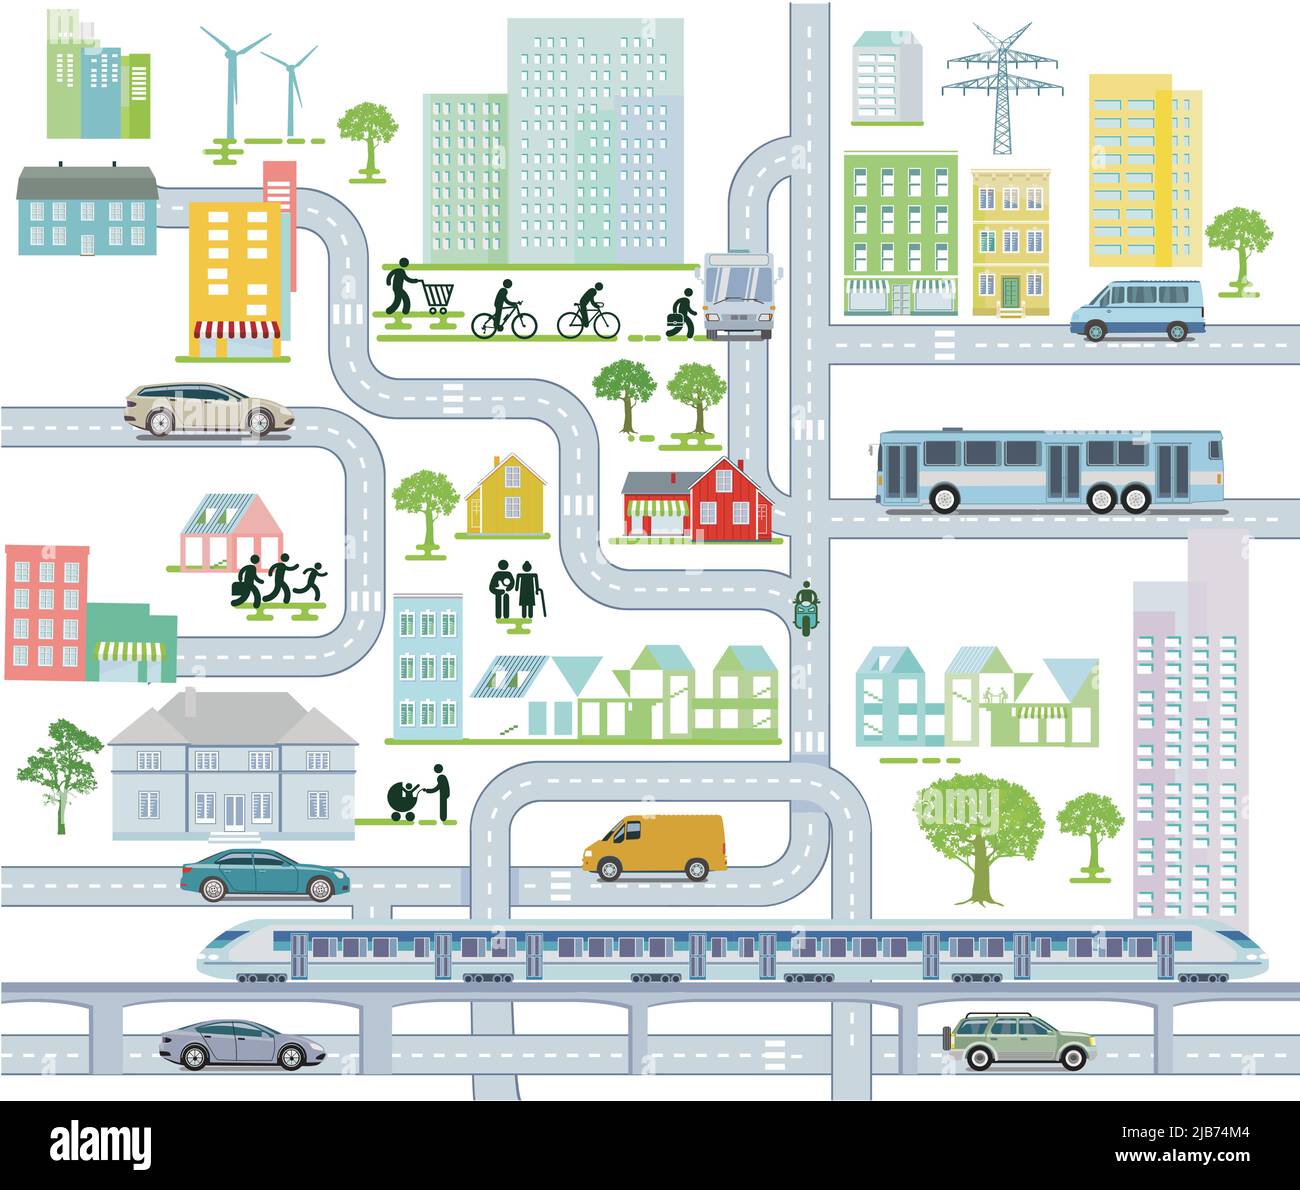 City map with road traffic and houses, information illustration Stock Vector